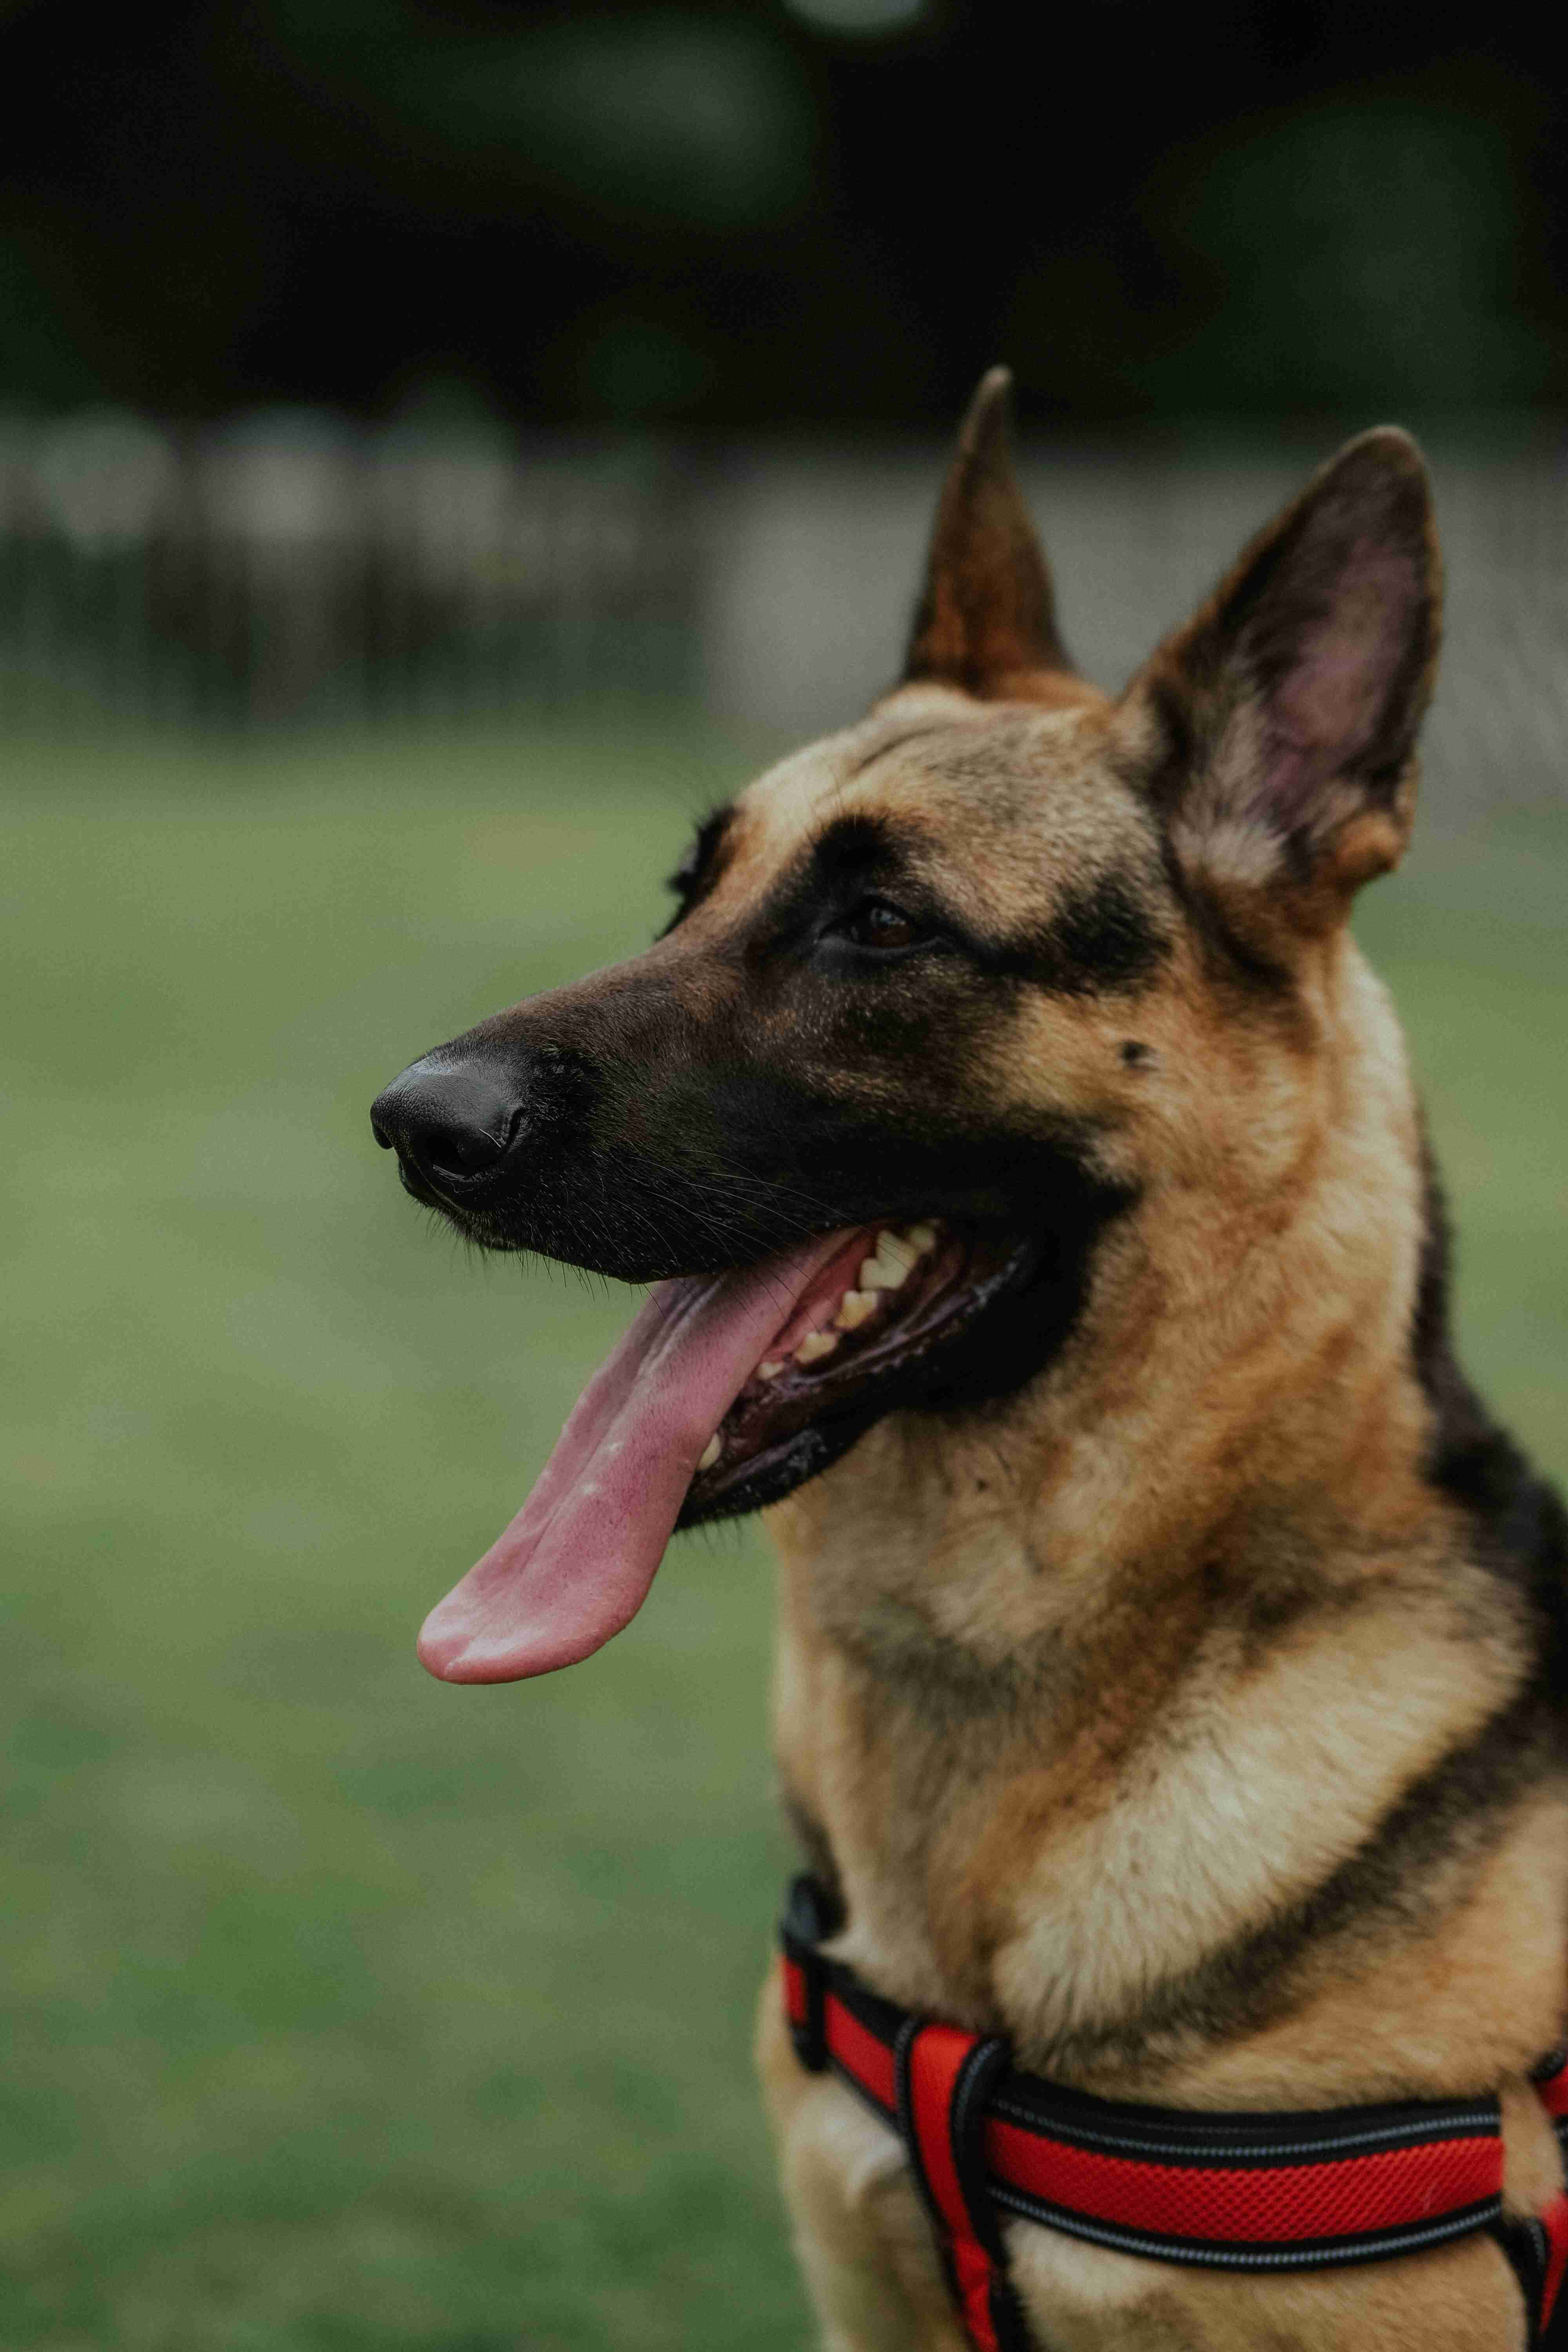 How can I prevent my German Shepherd from developing skin problems due to environmental factors?